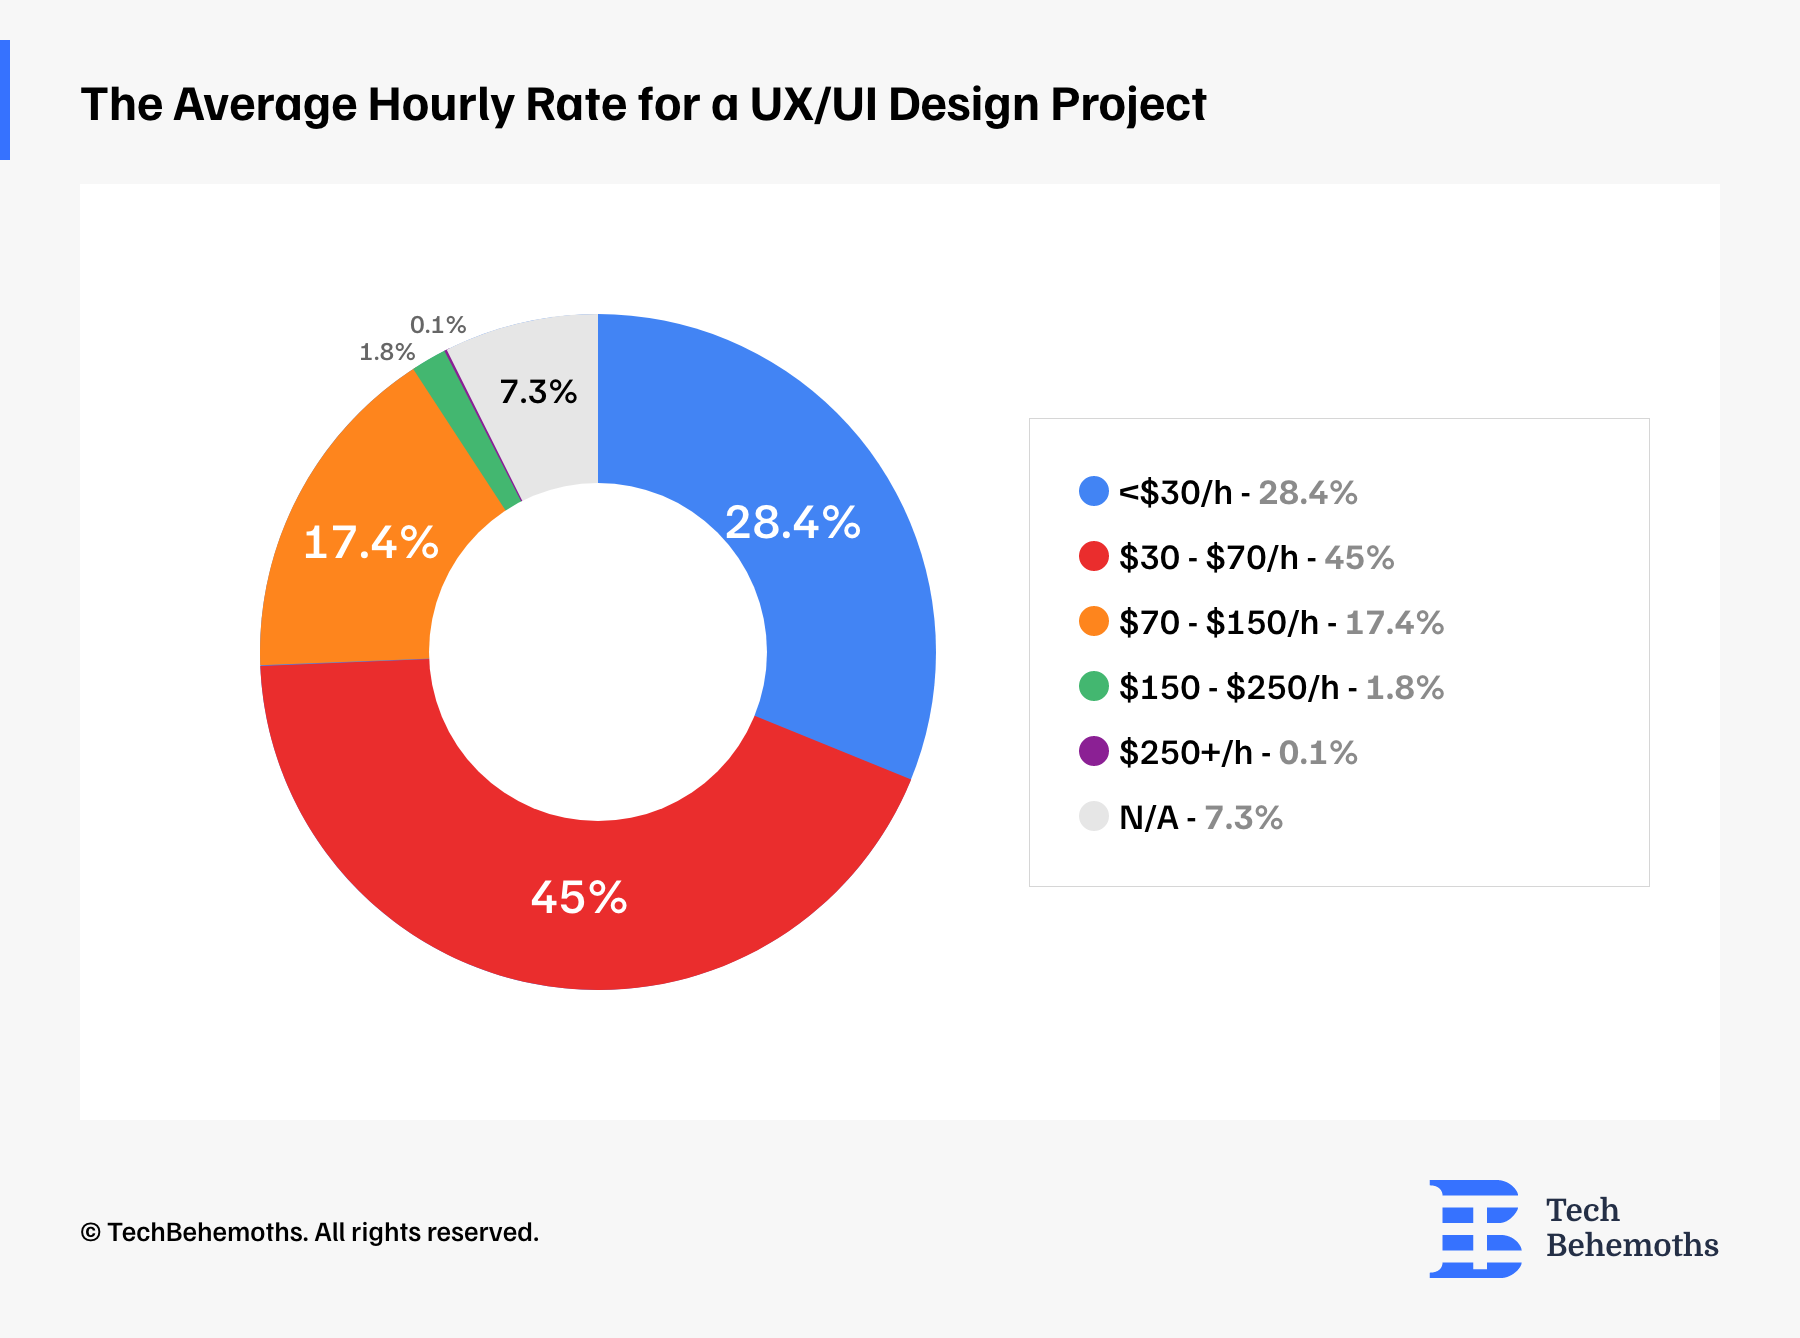 The Average Hourly Rate for a UX/UI Design Project